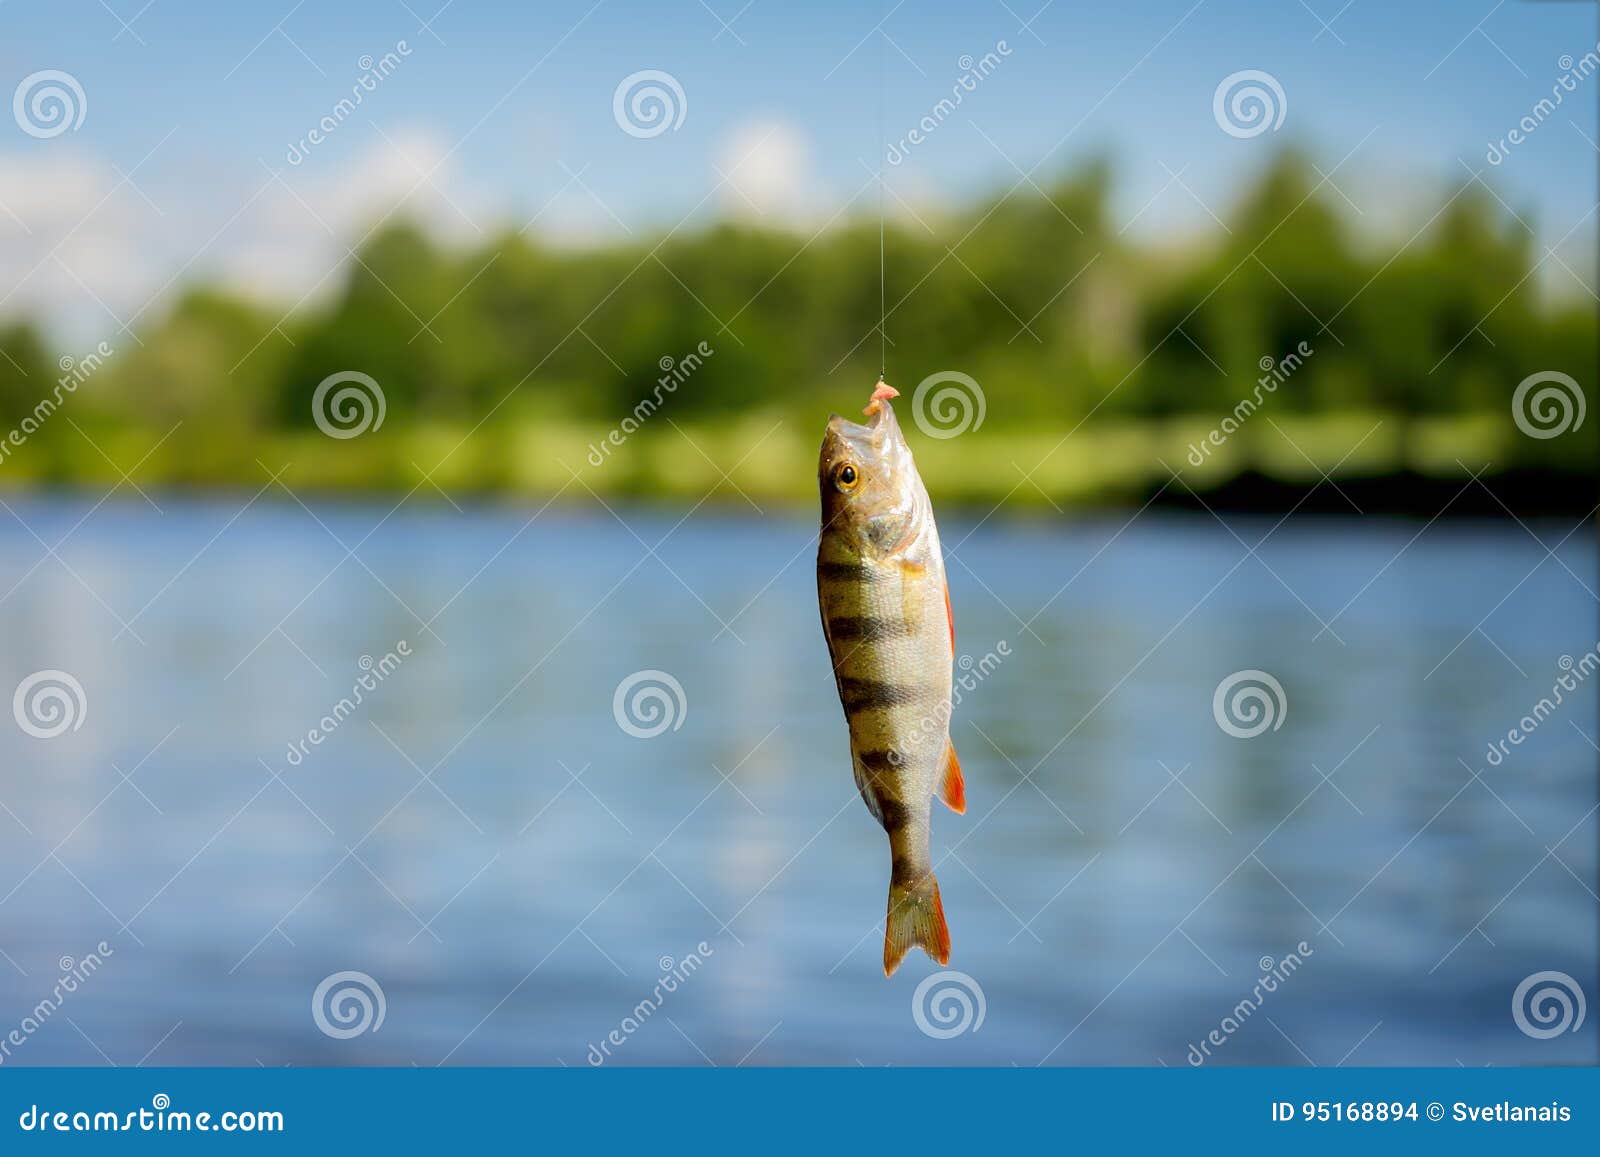 Bright Beautiful Caught Fish of Perch, Hanging on Hook with Bait